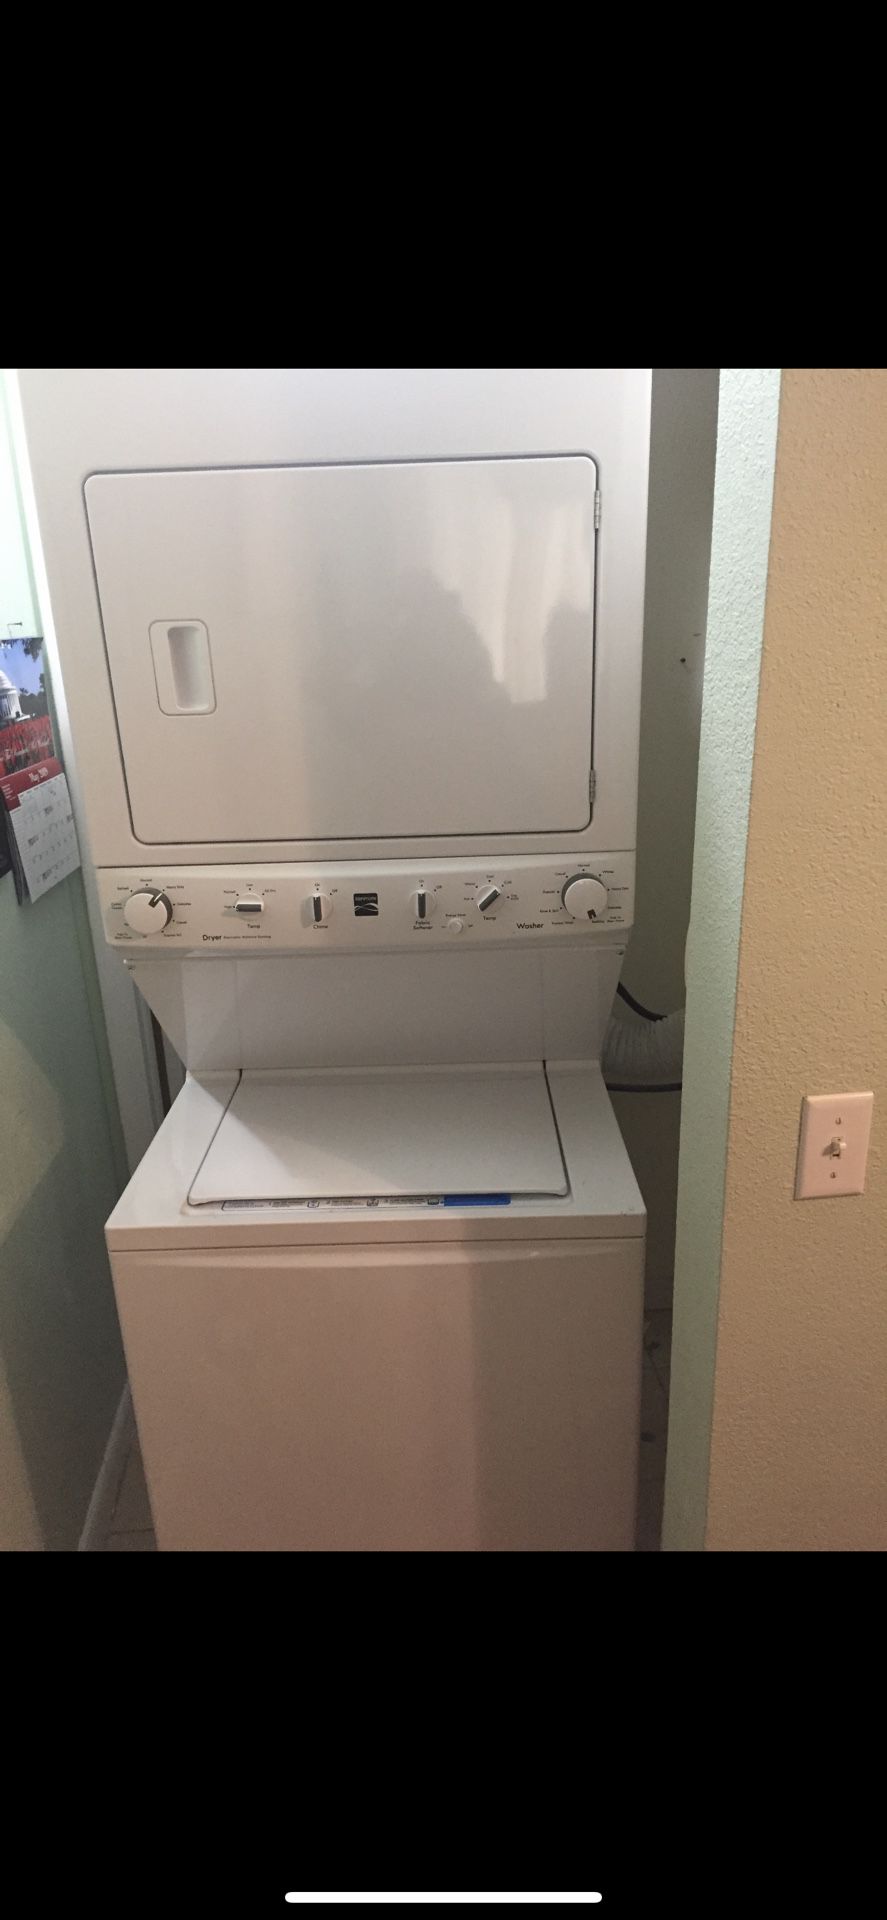 Kenmore washer/dryer